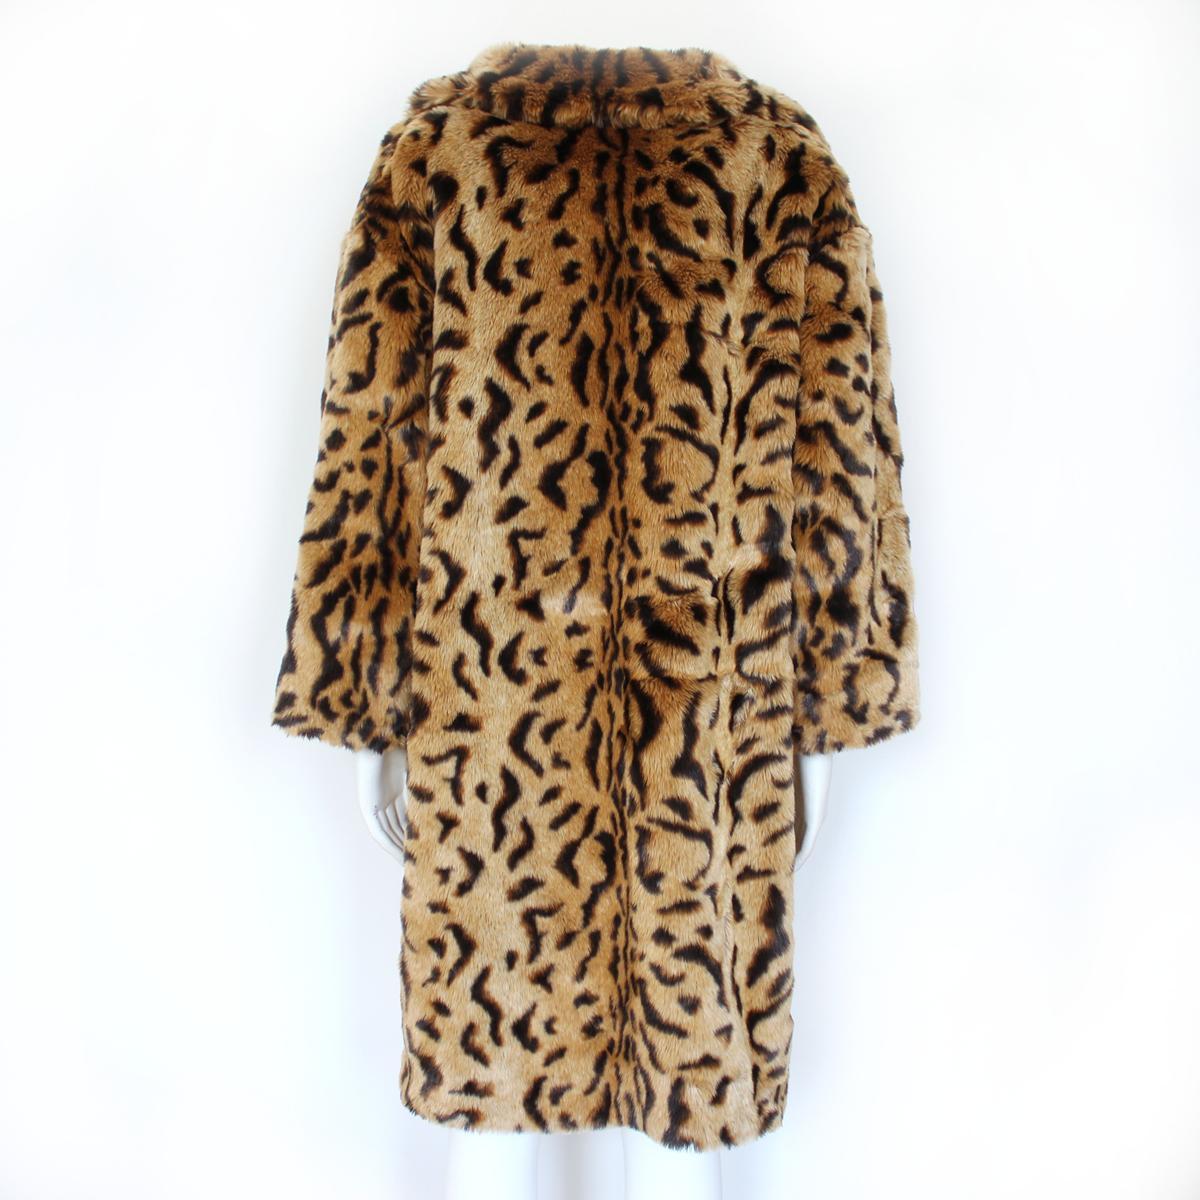 Fantastic fur coat by Miu Miu
Ecologic fur
Animalier pattern
Long sleeve
2 Pockets
Hooks closure
Total length from shoulder cm 80 (31.4 inches)
Worldwide express shipping included in the price !